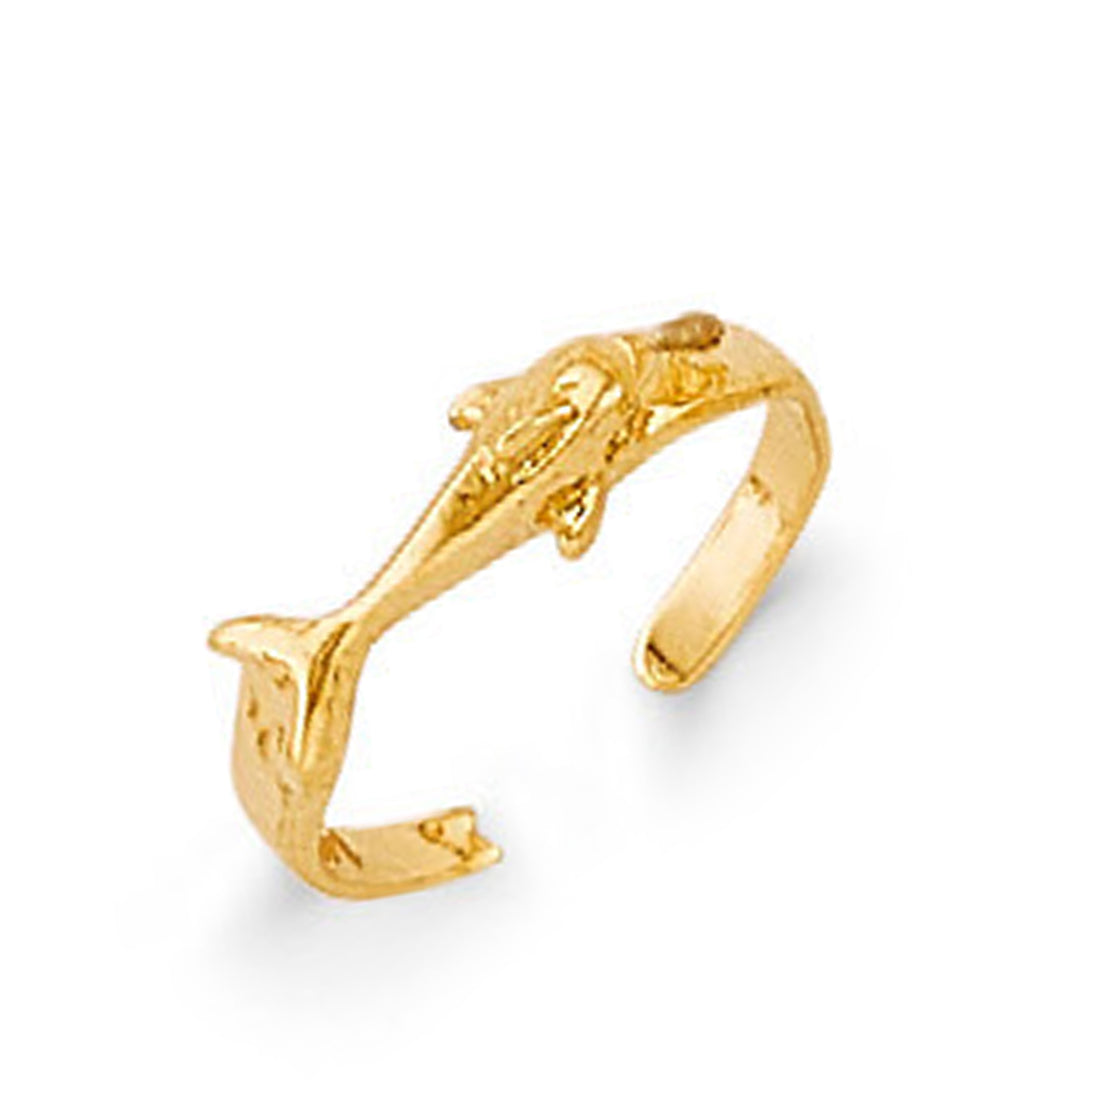 Minimalist Dolphin Band in Solid Gold 